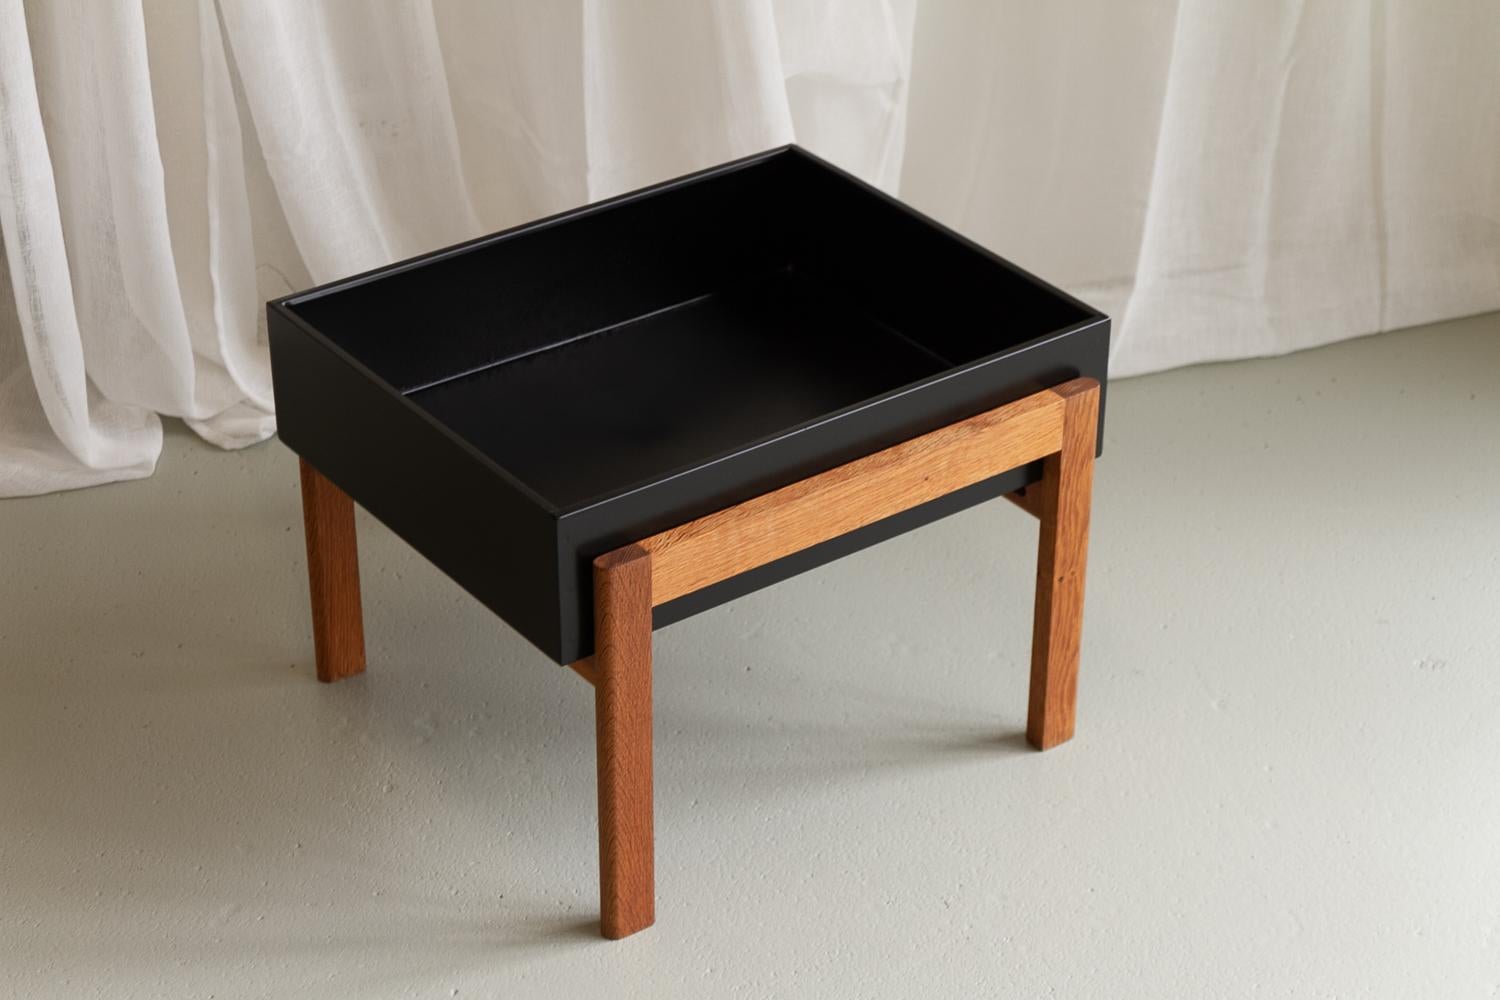 Danish Modern Oak Planter, 1960s.

Scandinavian Mid-Century Modern minimalist planter with oak frame and black lacquered metal flower box.

The metal container has been repainted in black satin finish. The wooden frame has been cleaned and polished.